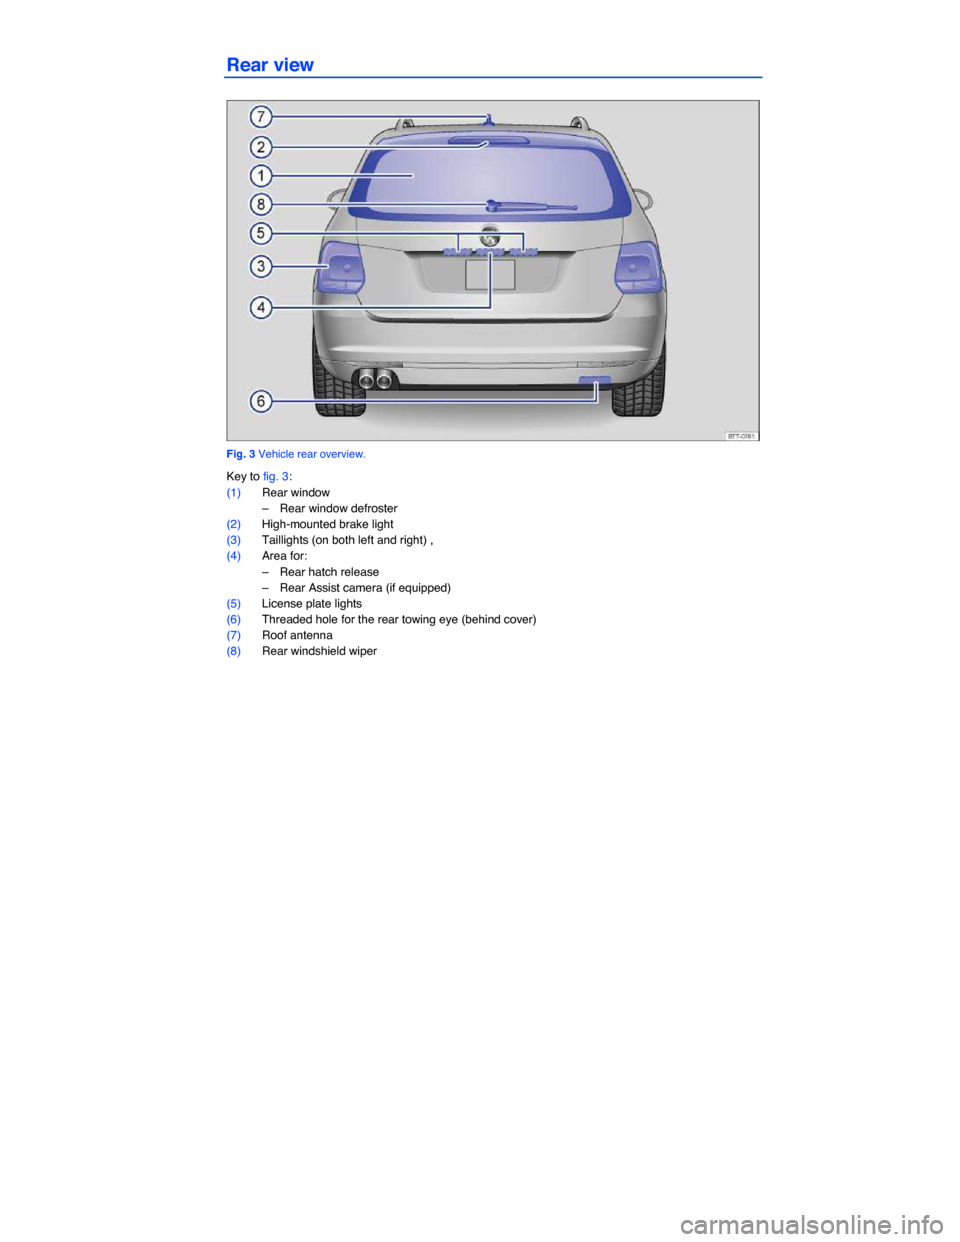 VOLKSWAGEN JETTA SPORTWAGEN 2014 1B / 6.G Owners Manual  
Rear view 
 
Fig. 3 Vehicle rear overview. 
Key to fig. 3: 
(1) Rear window 
–  Rear window defroster  
(2) High-mounted brake light  
(3) Taillights (on both left and right) ,  
(4) Area for: 
�